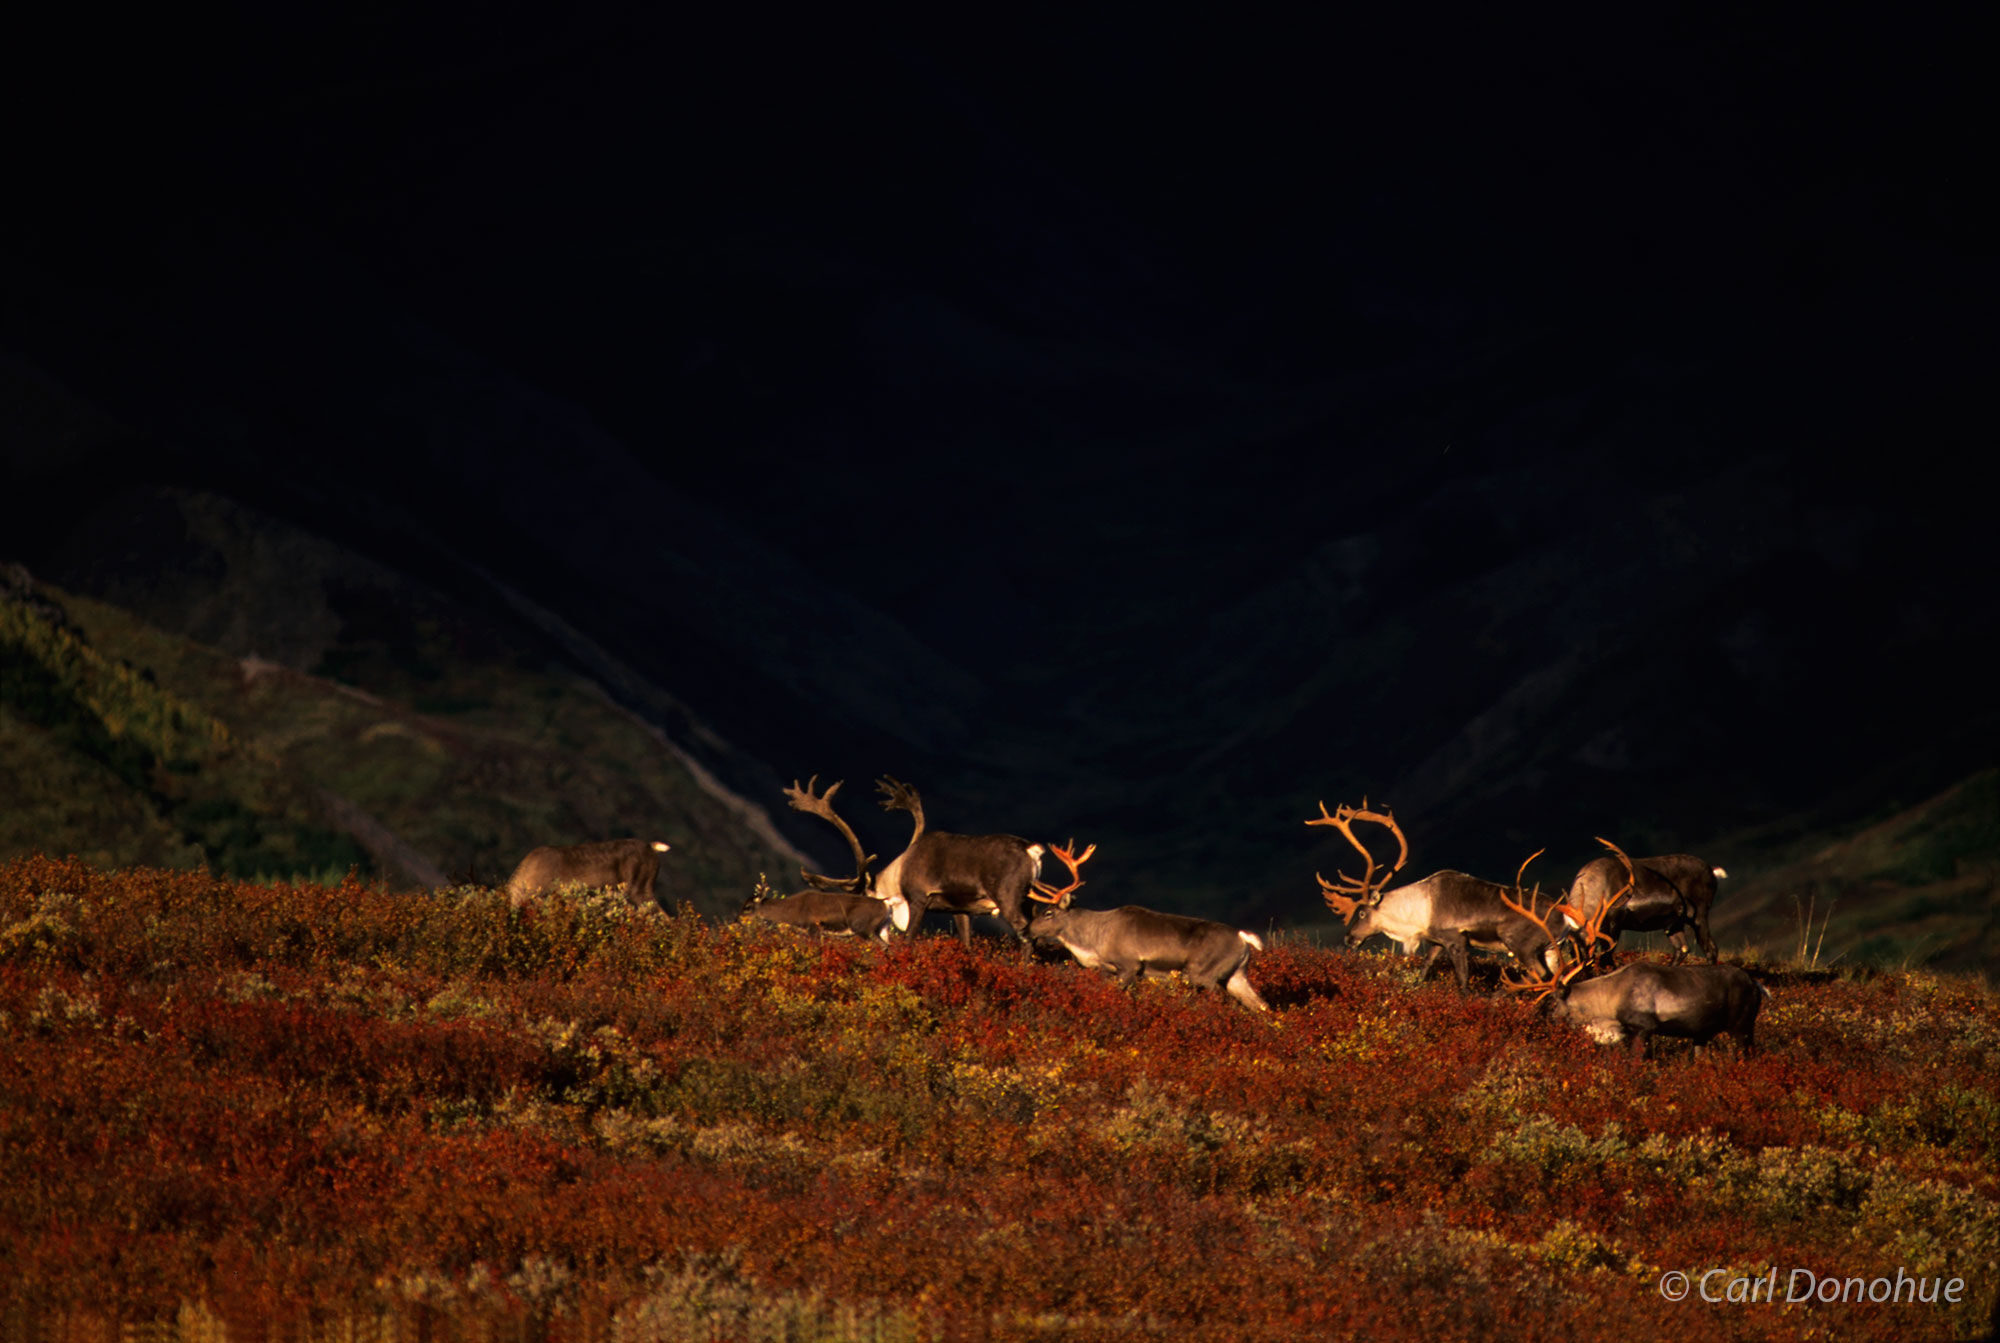 The migration of a small caribou herd, calves, bulls and cows across the open tundra during late fall, Denali National Park, Alaska.